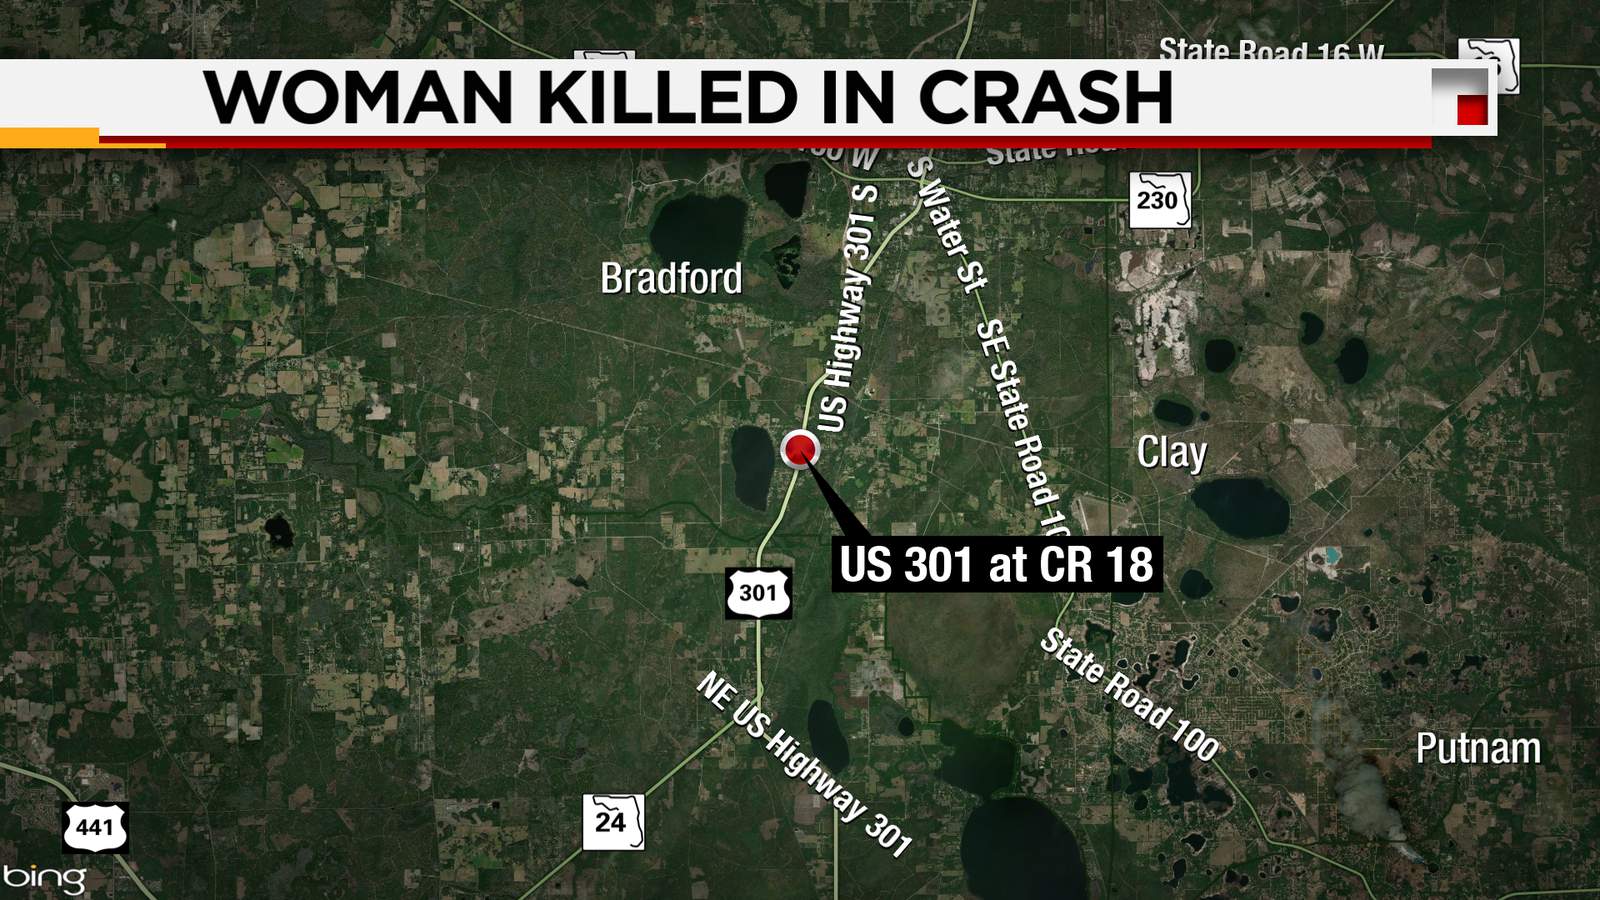 1 dead, 1 seriously injured in wrong way crash